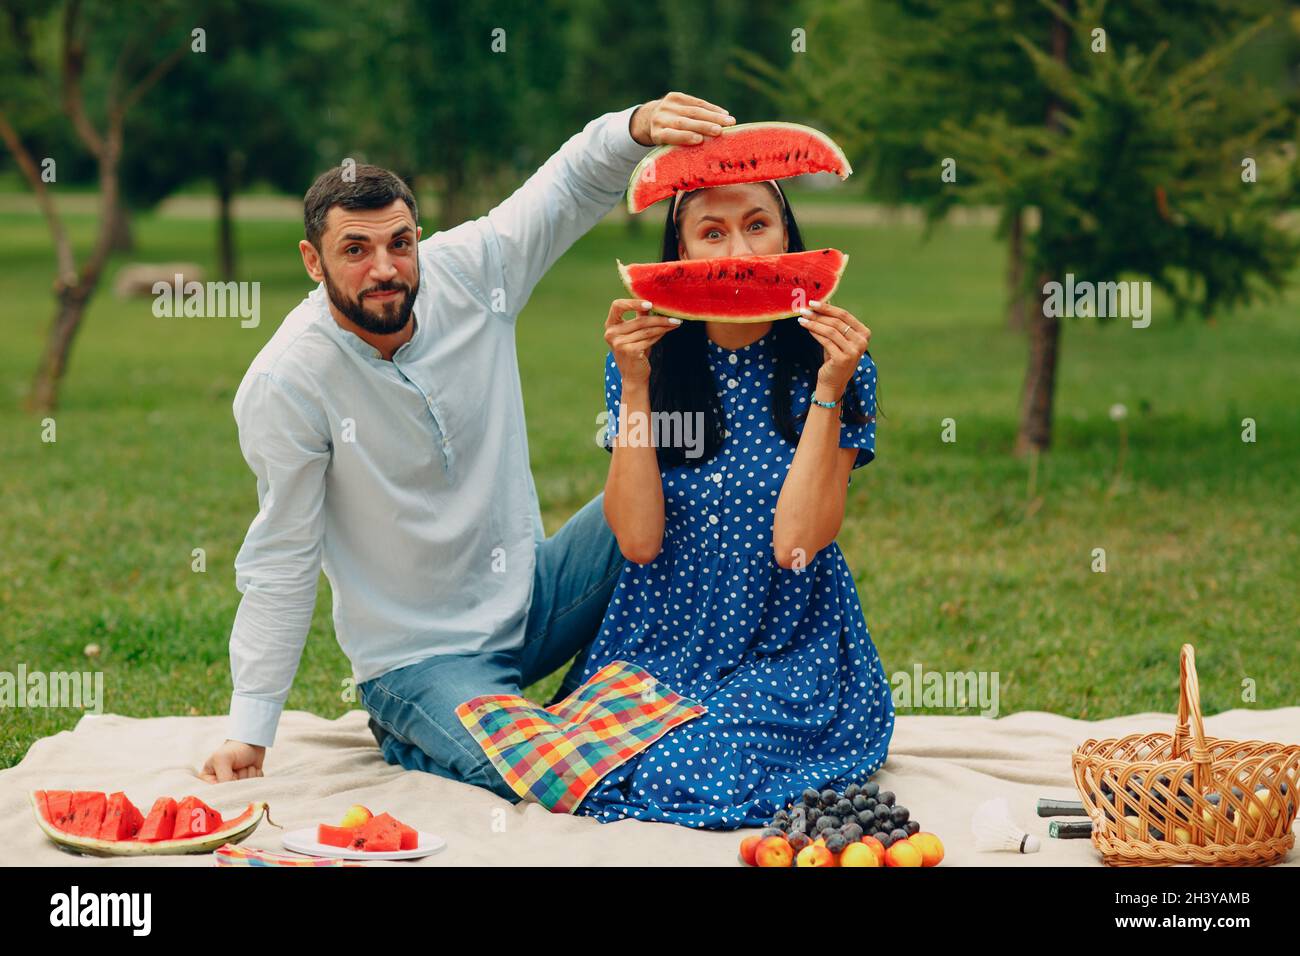 https://c8.alamy.com/comp/2H3YAMB/young-adult-woman-and-man-couple-picnic-at-green-grass-meadow-in-park-having-fun-with-watermelon-2H3YAMB.jpg